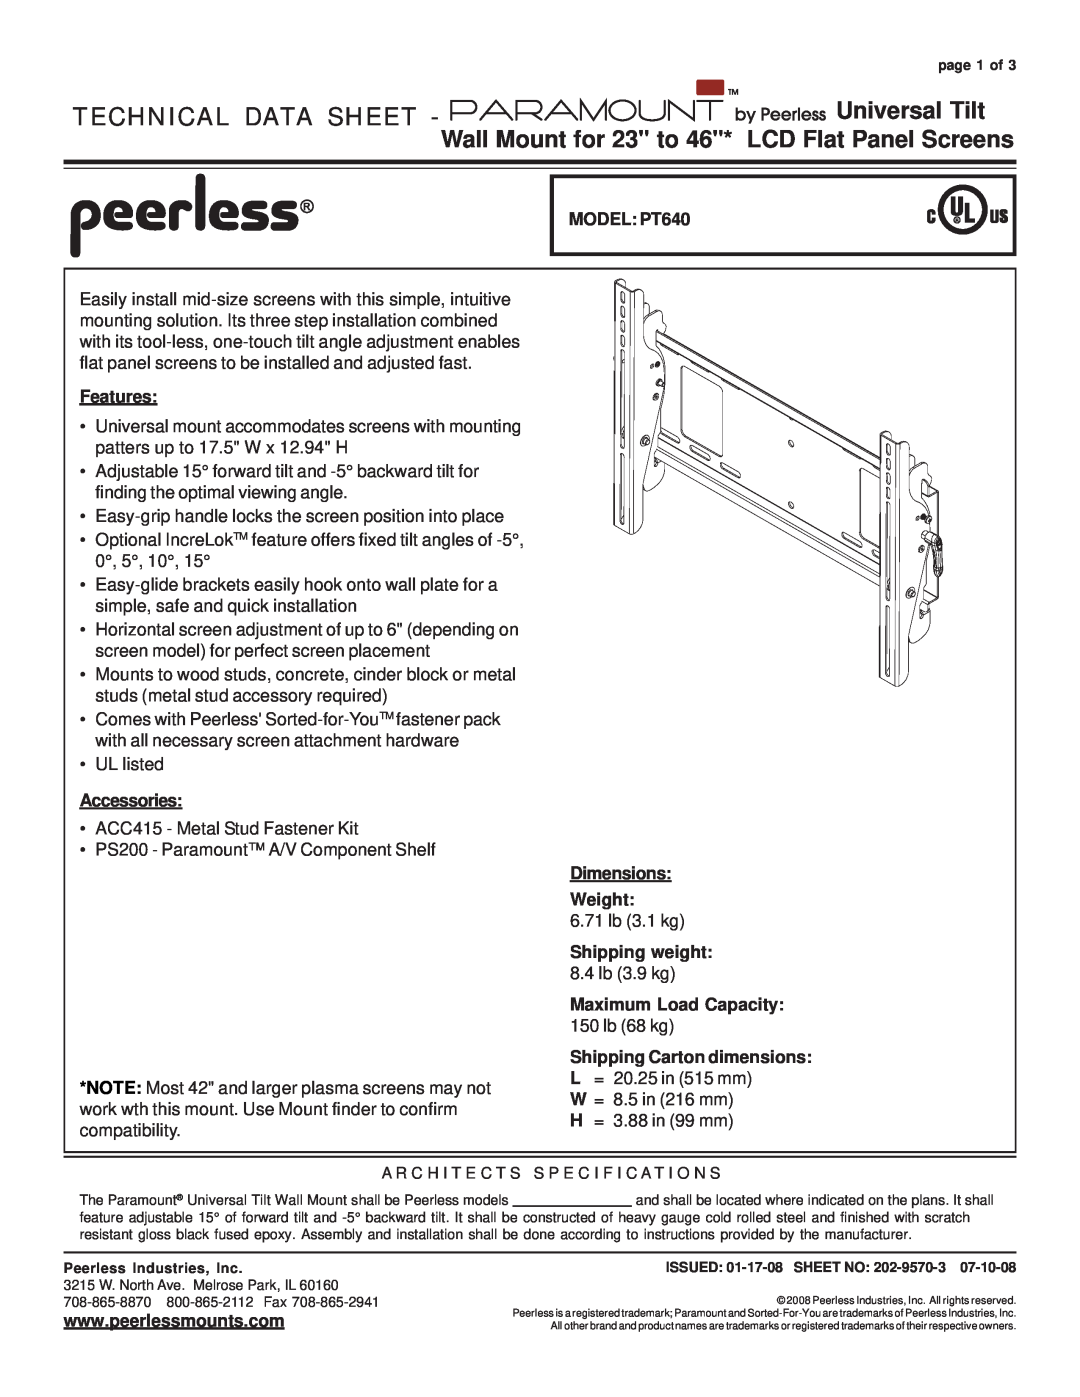 Peerless Industries dimensions MODEL PT640, Features, Accessories, Dimensions Weight, Shipping weight 